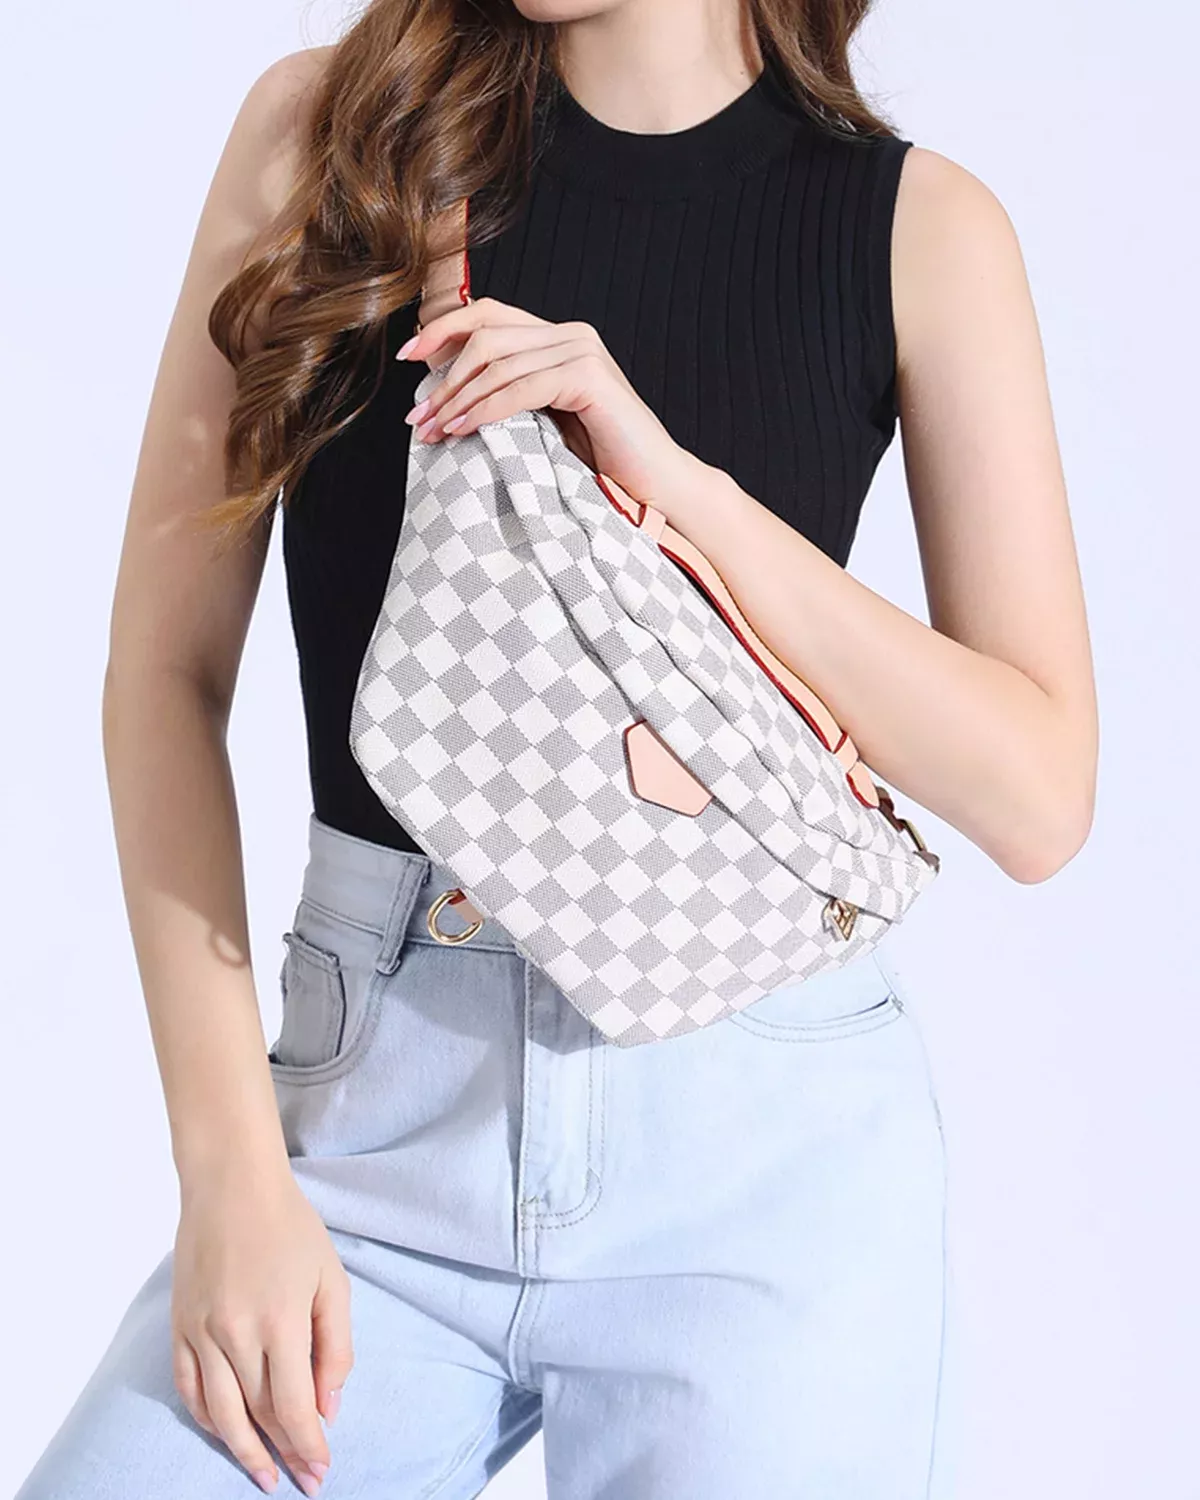 TWENTY FOUR Womens Checkered Tote Shoulder Bag with inner pouch - PU Vegan  Leather Shoulder Satchel Fashion Bags -Cream checkered 